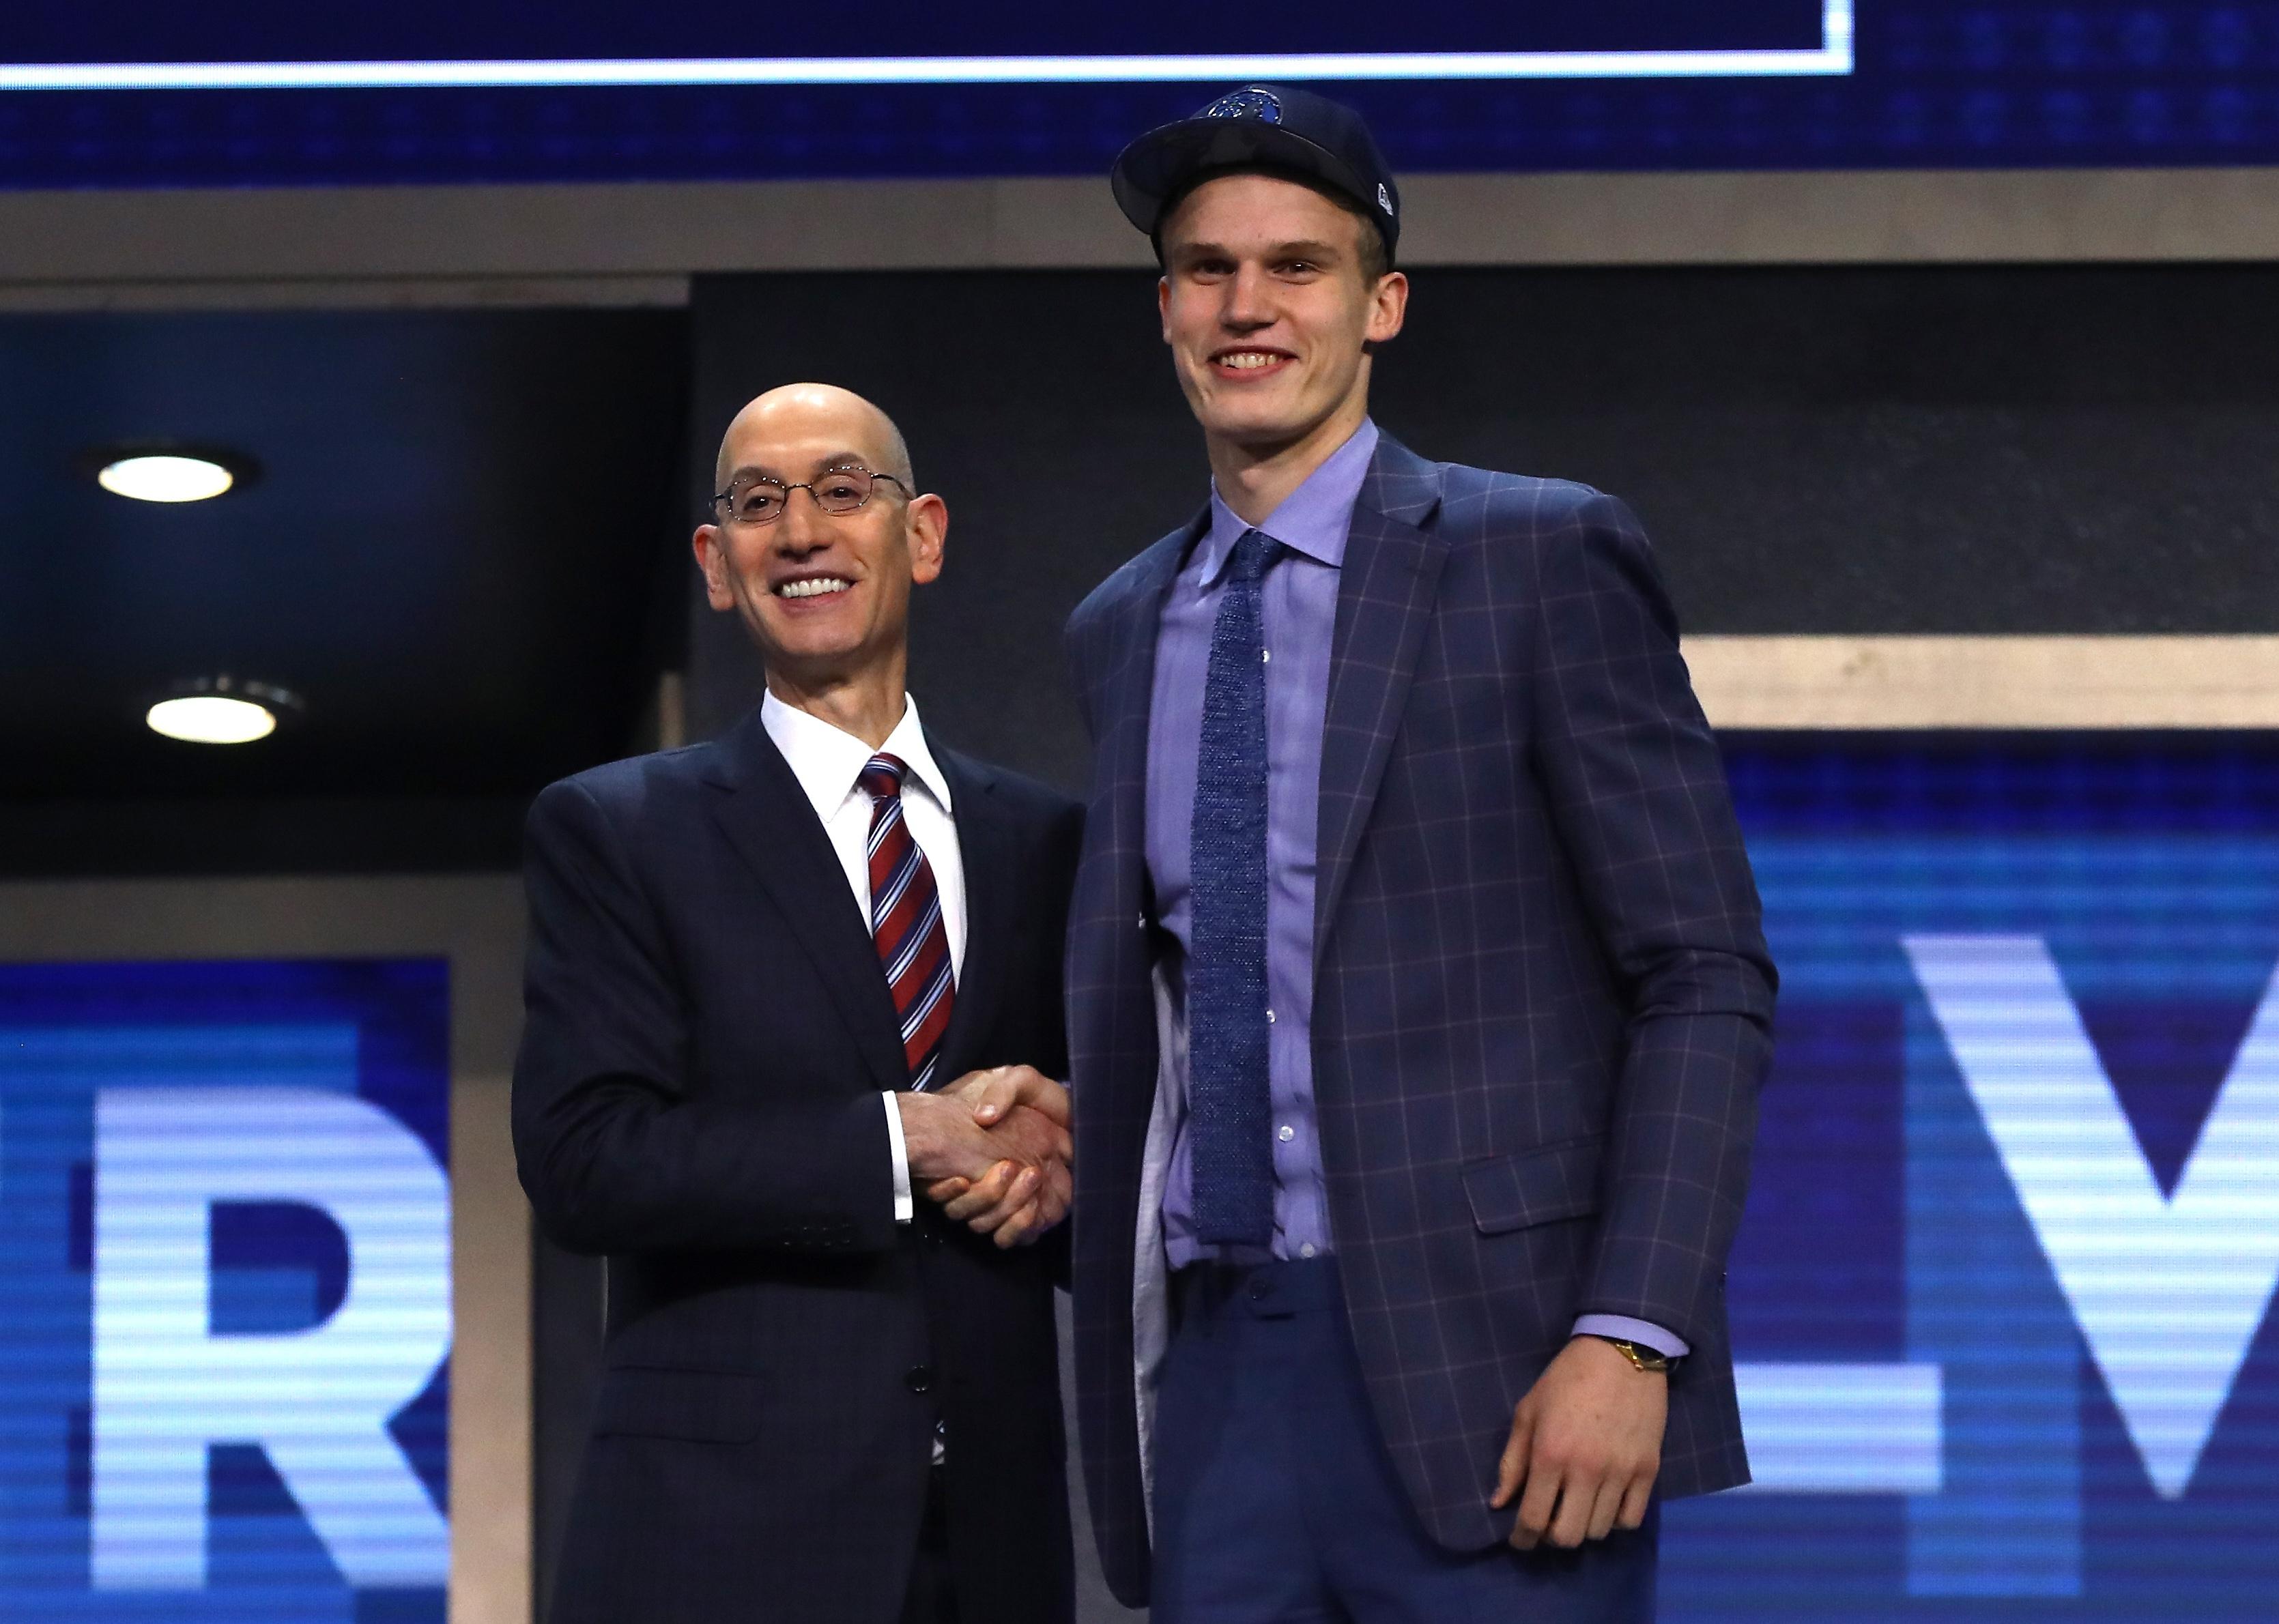 Lauri Markkanen on stage with NBA commissioner Adam Silver after being drafted.